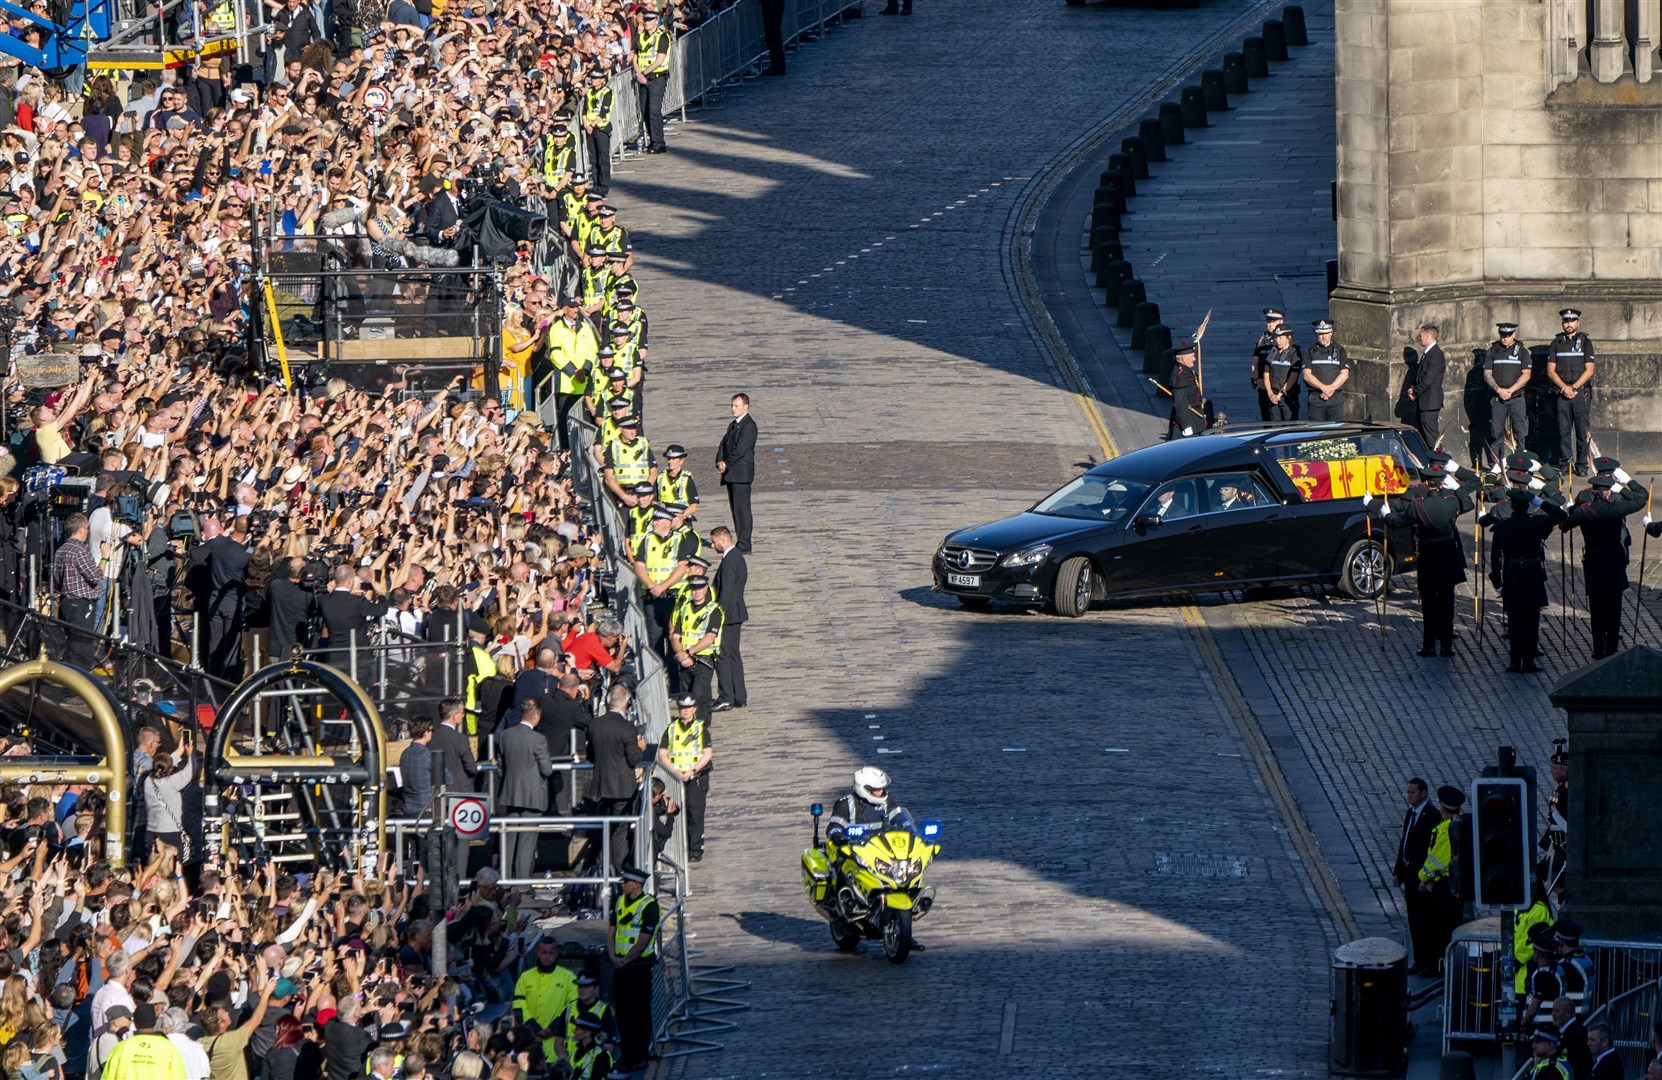 The hearse carrying the coffin of the Queen travels up the Royal Mile after departing St Giles’ Cathedral for Edinburgh Airport (Jane Barlow/PA)